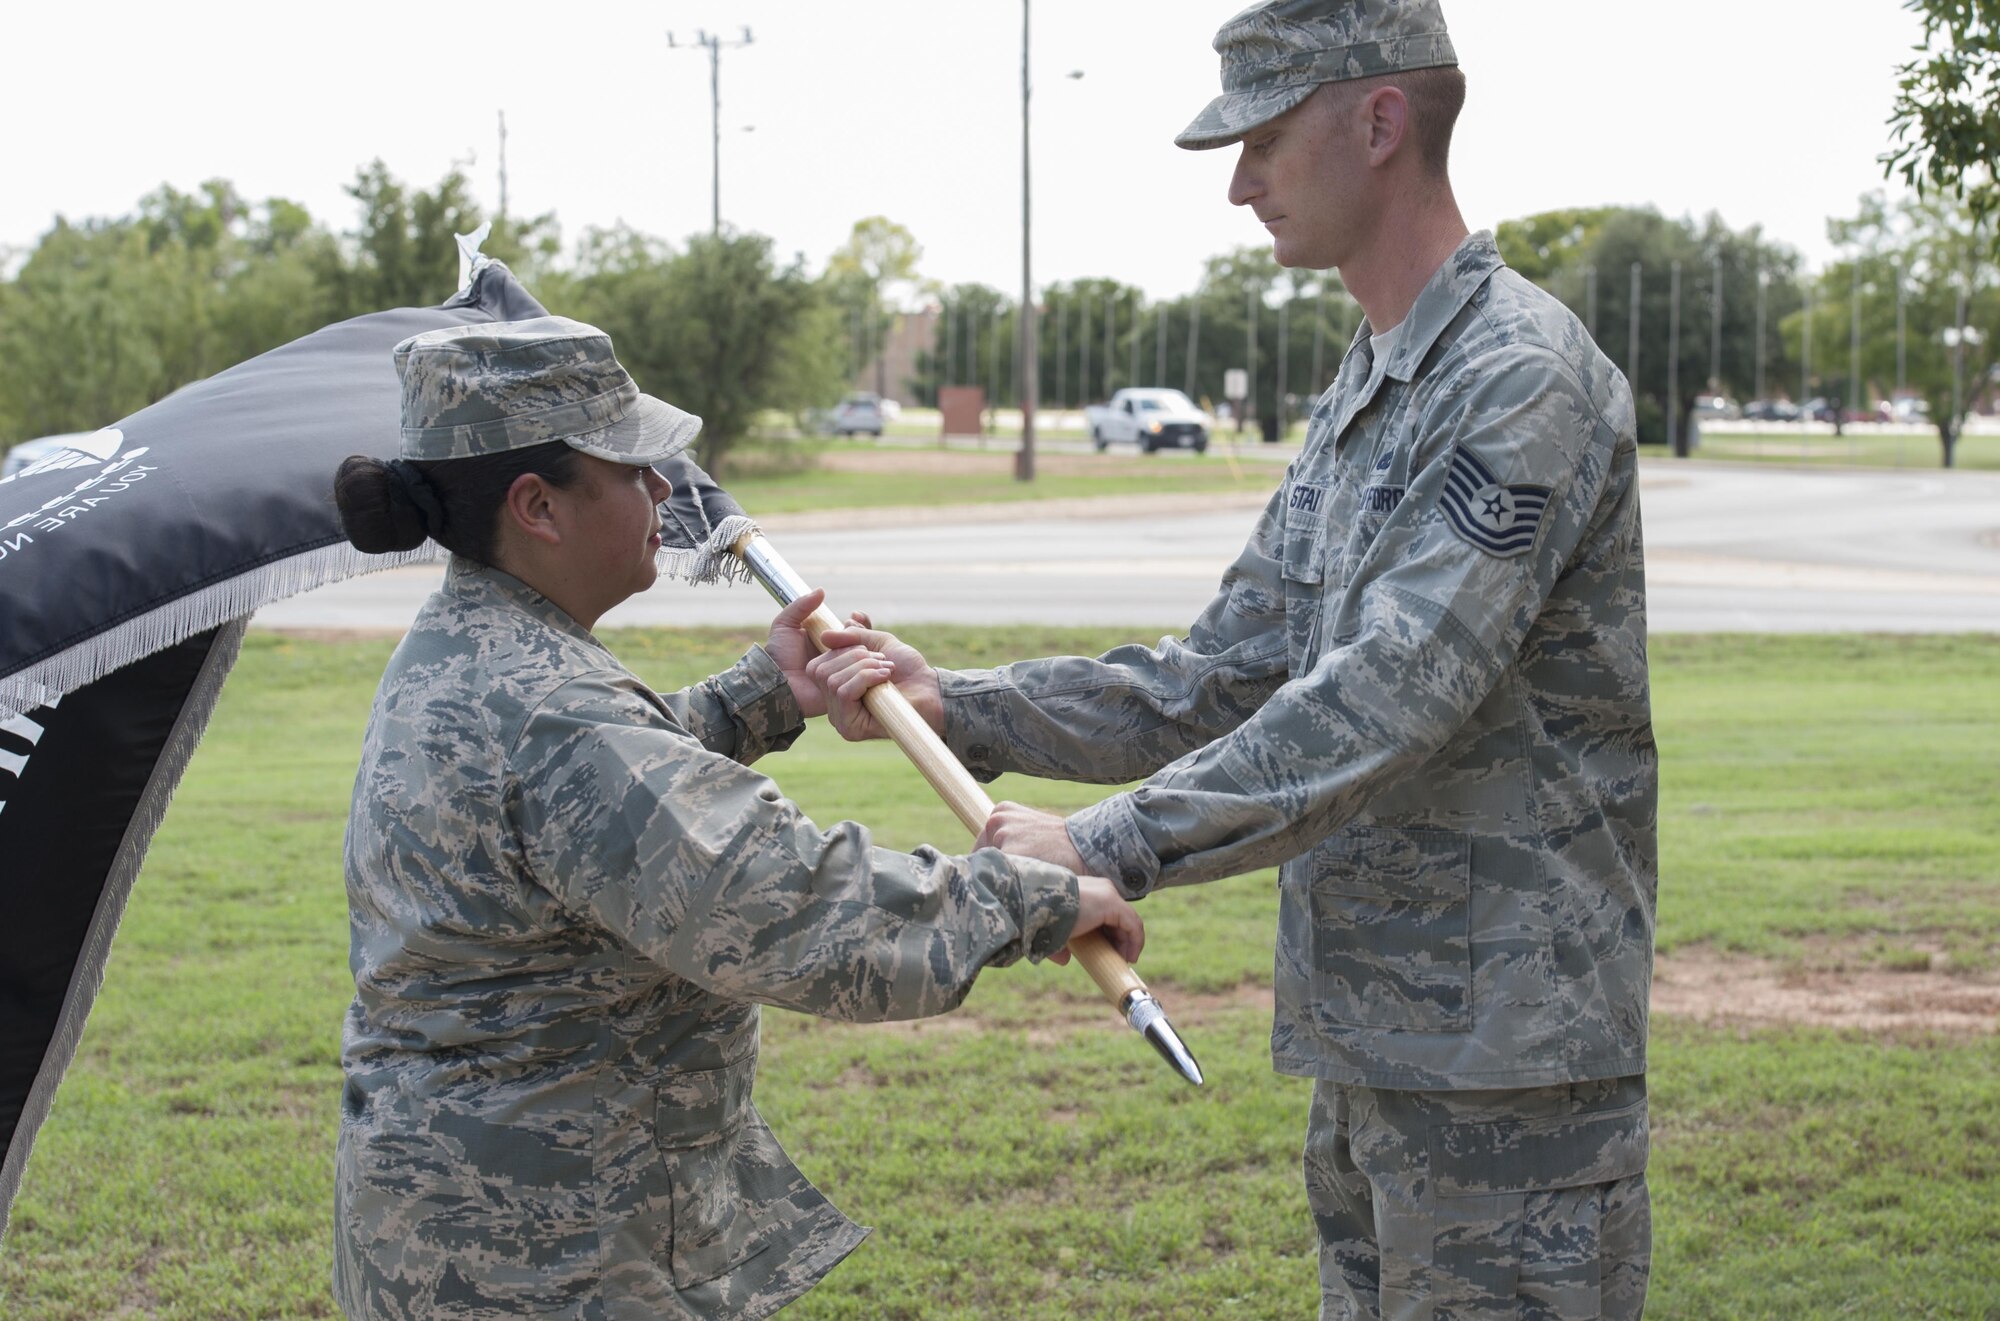 U.S. Air Force Maj. Christina Encina, 7th Medical Support Squadron diagnostics flight commander, hands over the prisoner of war/missing in action flag to Tech. Sgt. David Stai, 7th Aircraft Maintenance Squadraon B-1B Lancer production expeditor, at Dyess Air Force Base, Sept. 16, 2016. The POW/MIA flag was designed during the Vietnam war and carries no trademark nor copyright to allow for nonrestrictive, widespread use. (U.S. Air Force photo by Airman 1st Class Rebecca Van Syoc)